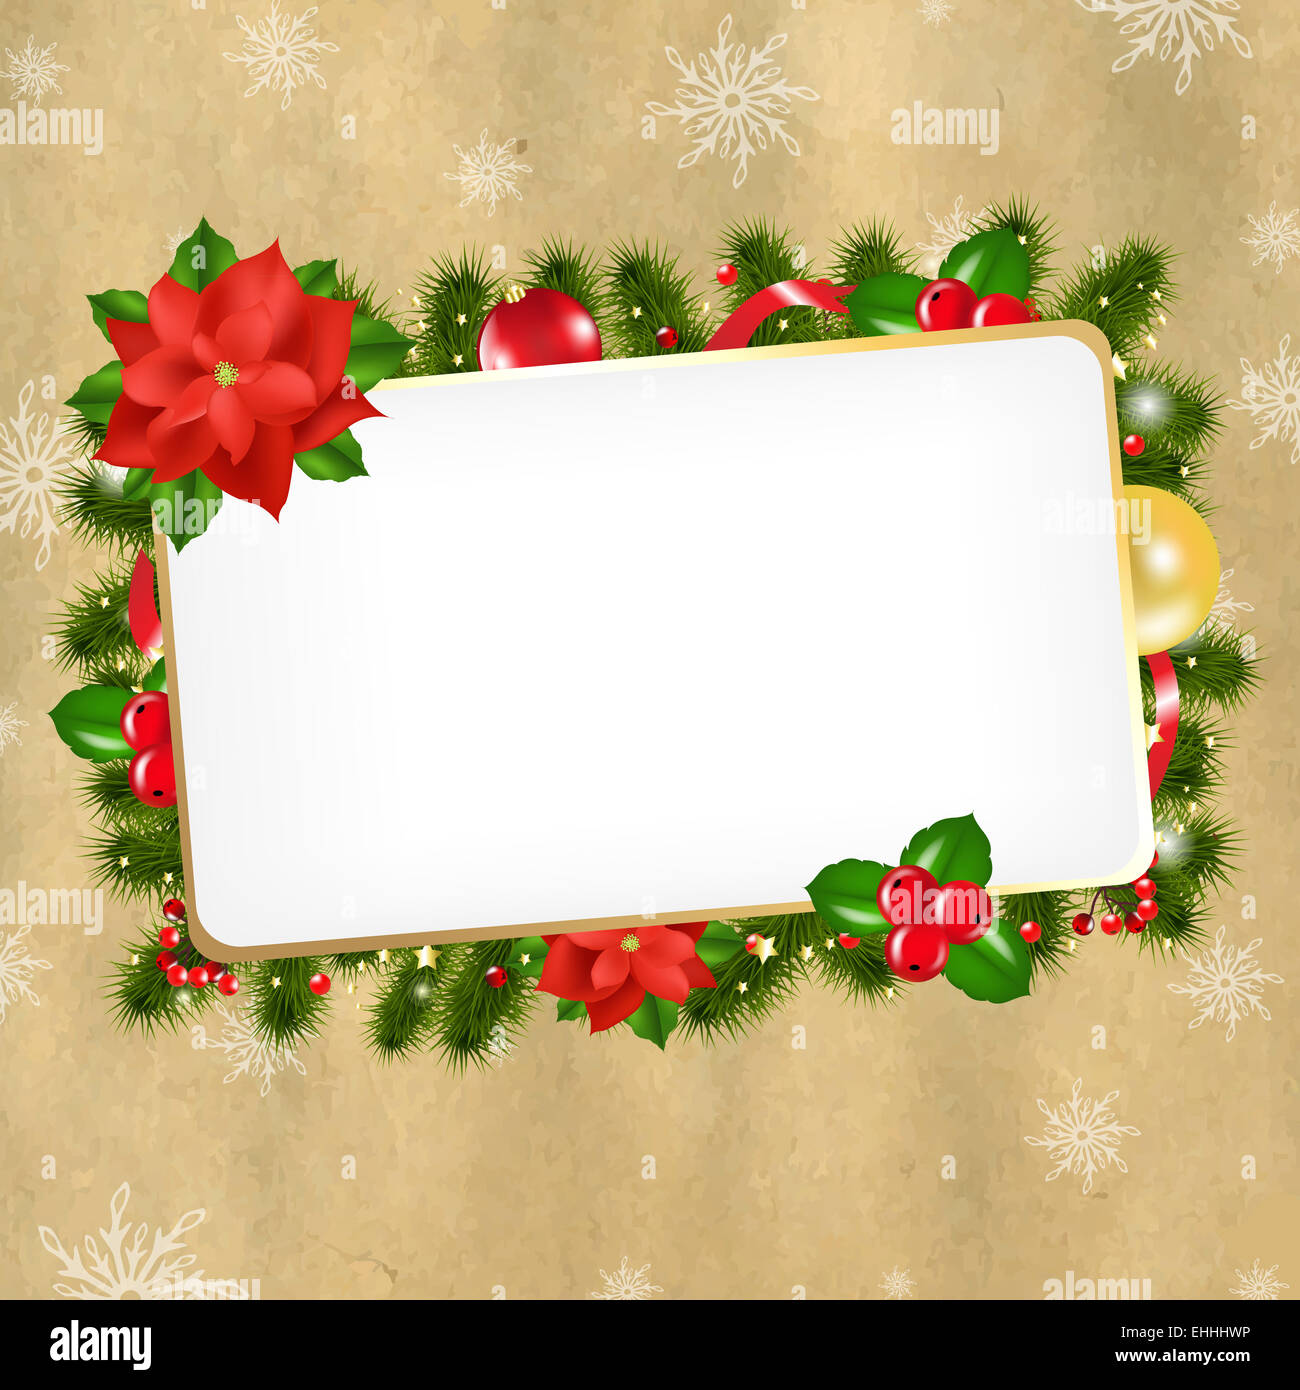 205+ Thousand Christmas Gift Tag Royalty-Free Images, Stock Photos